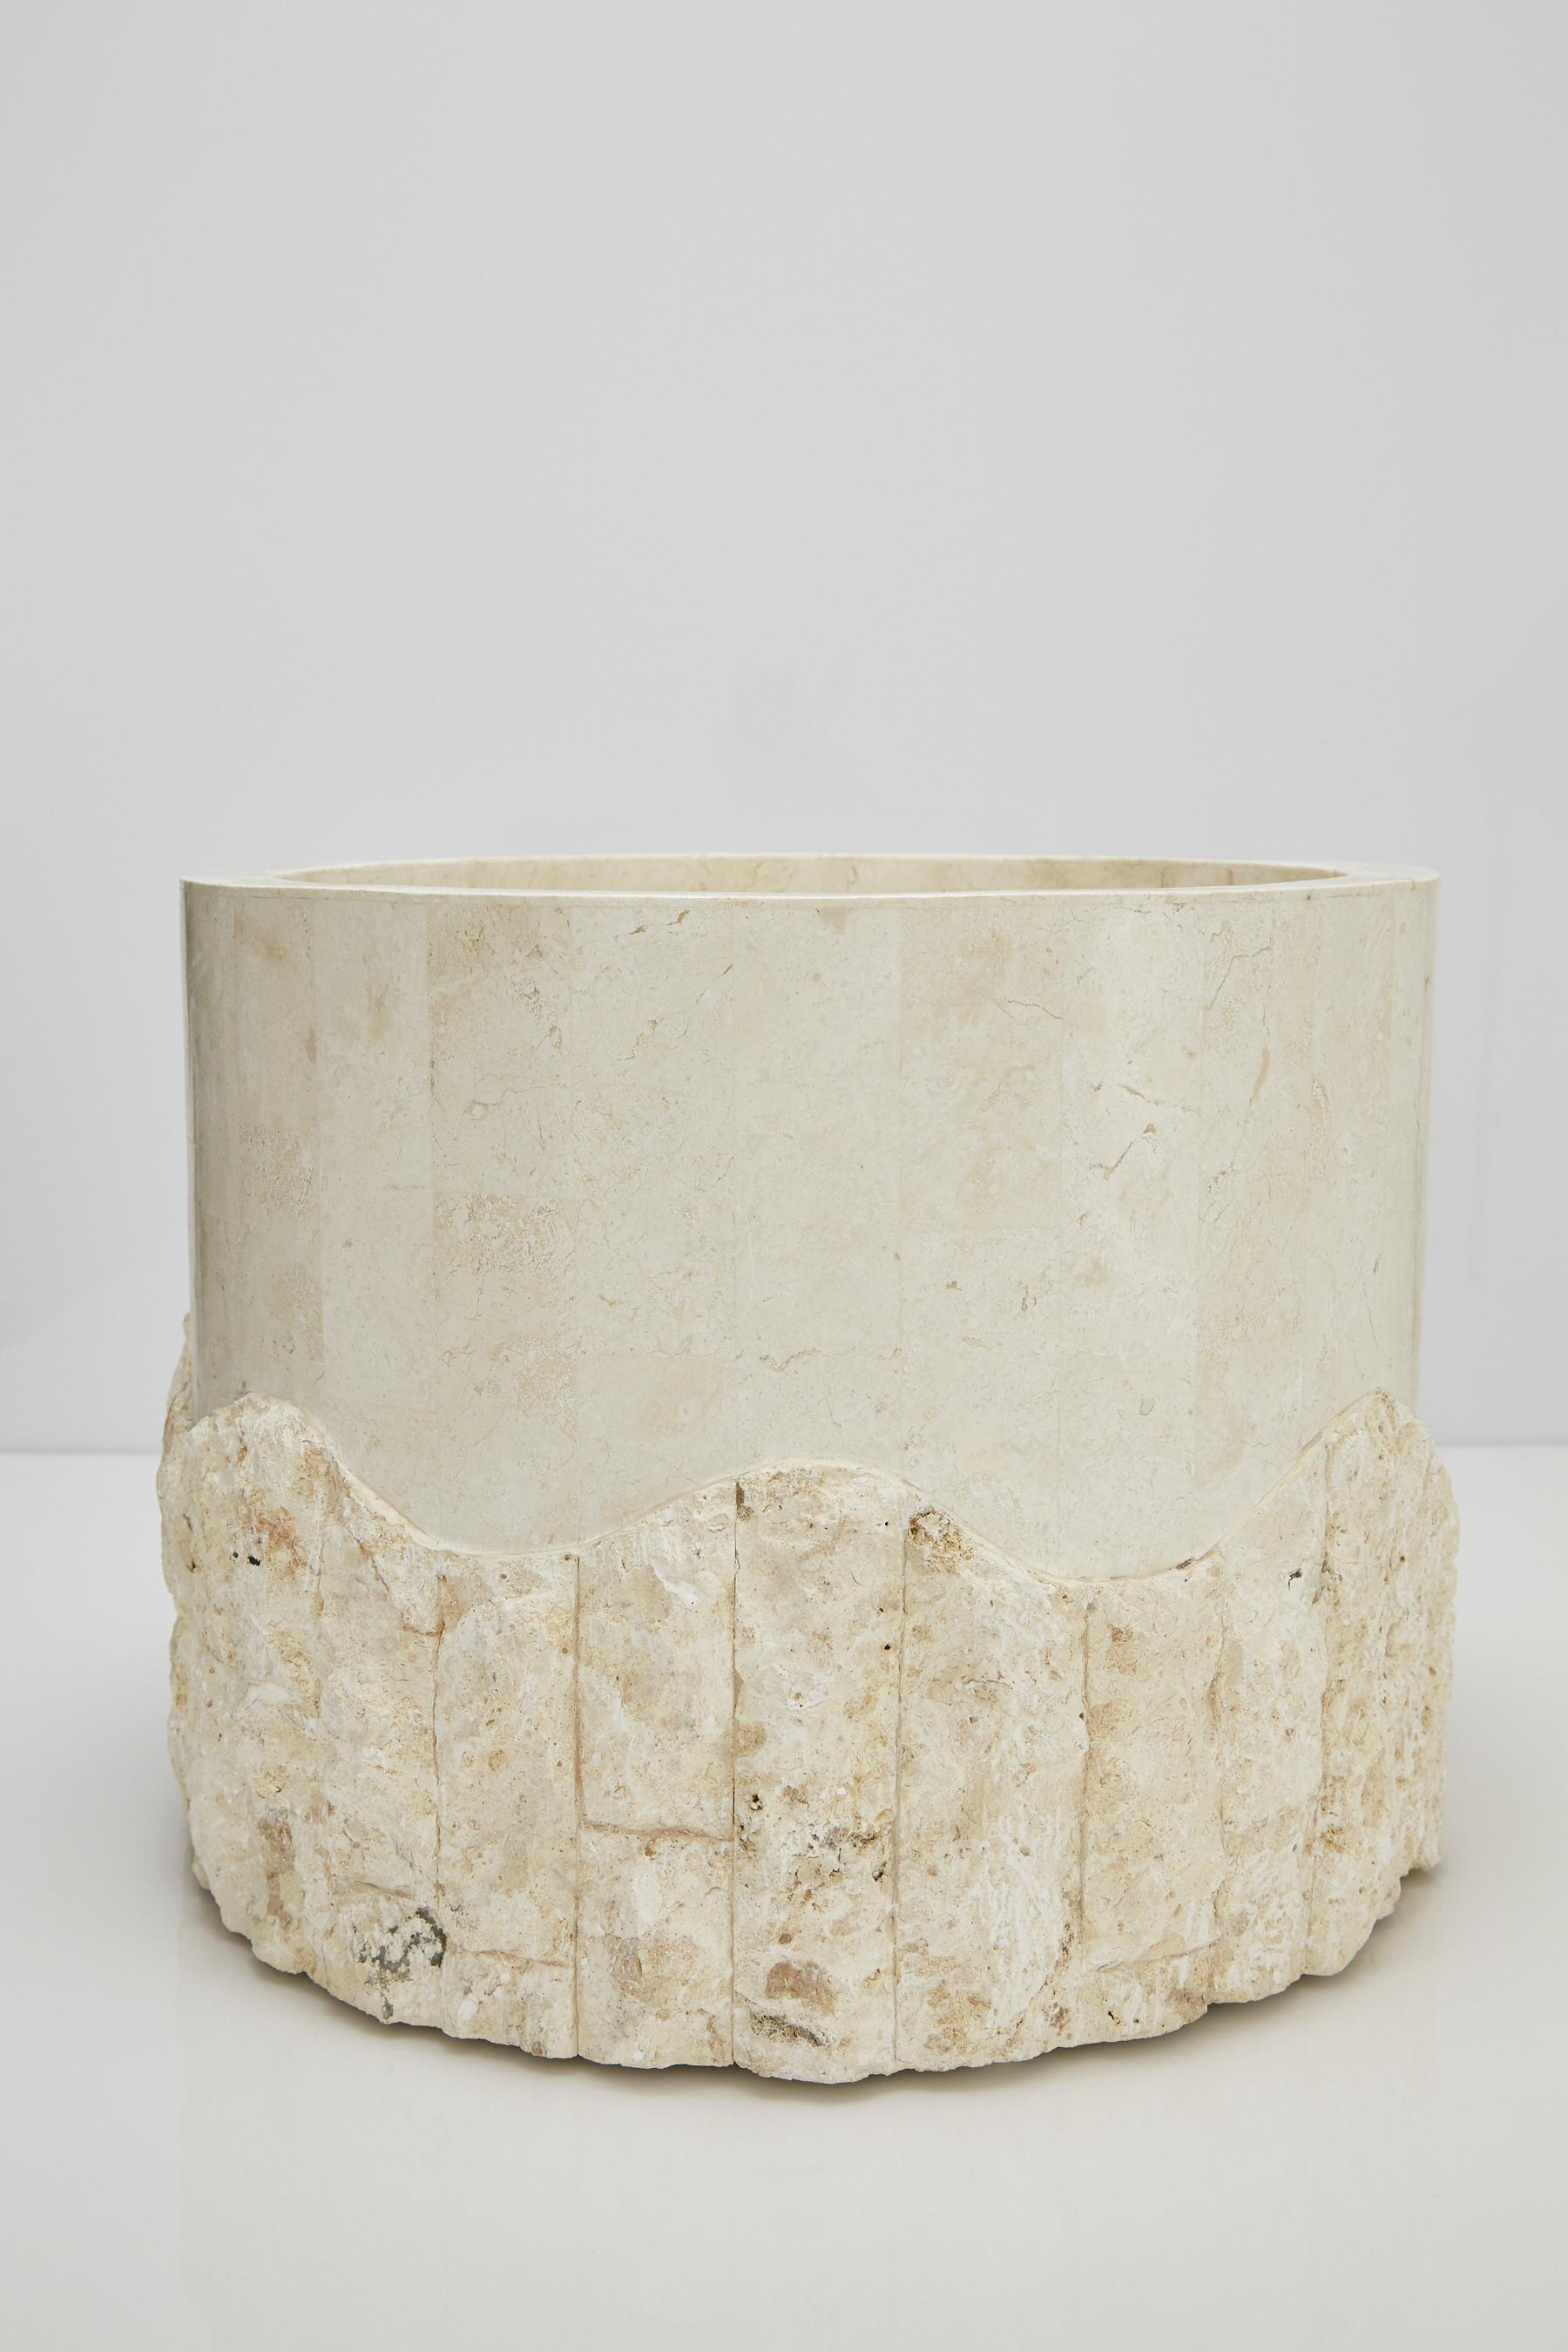 Philippine Large Postmodern Round Tessellated Stone Planter in Rough and Smooth, 1990s For Sale